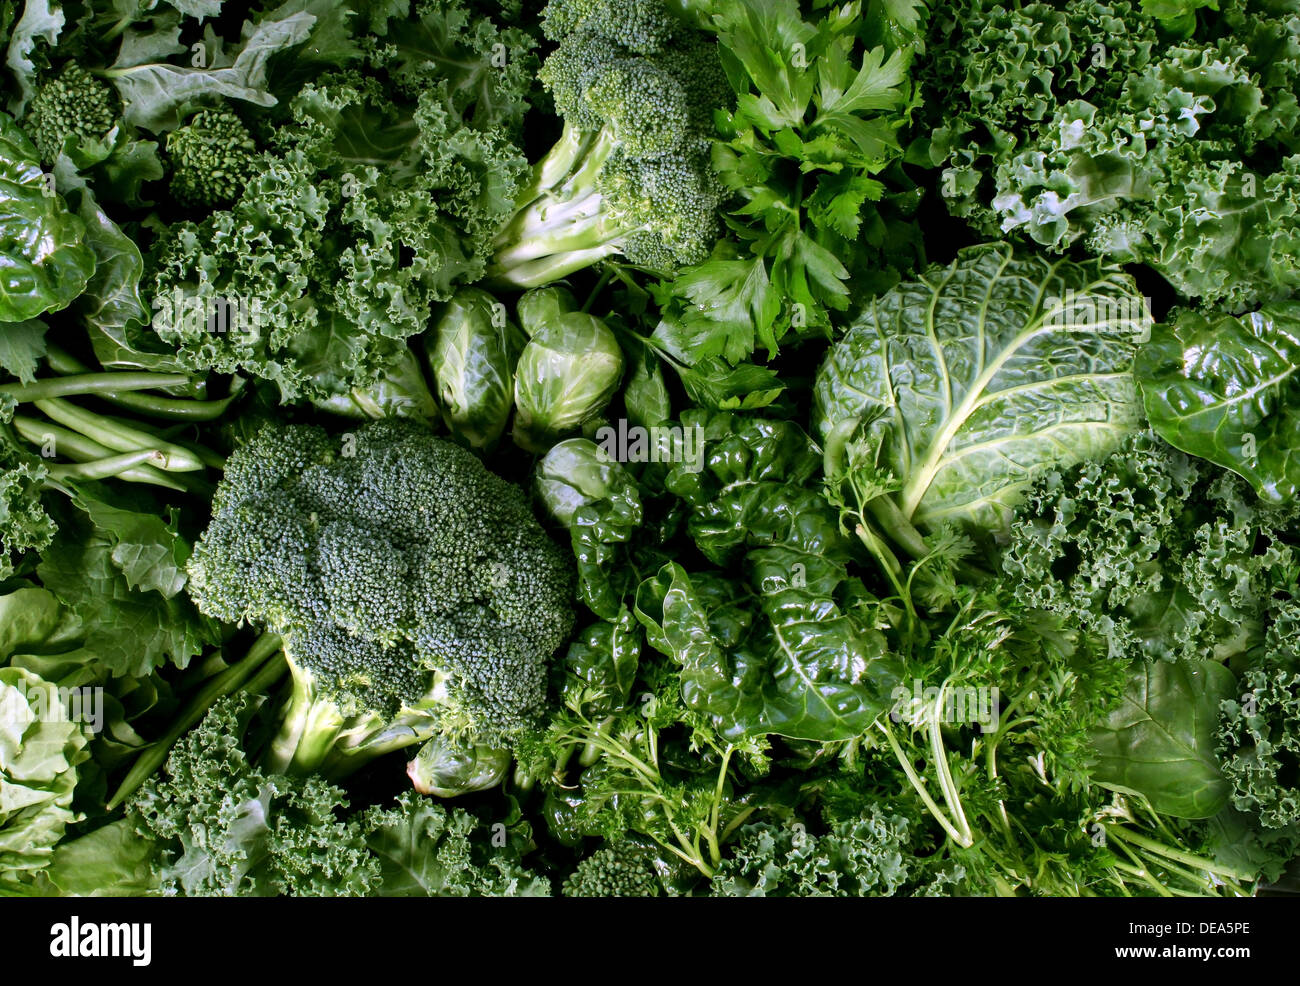 Green vegetables and dark leafy food background as a healthy eating concept  of fresh garden produce organically grown as a symbol of health as kale  swiss chard spinach collards broccoli and cabbage